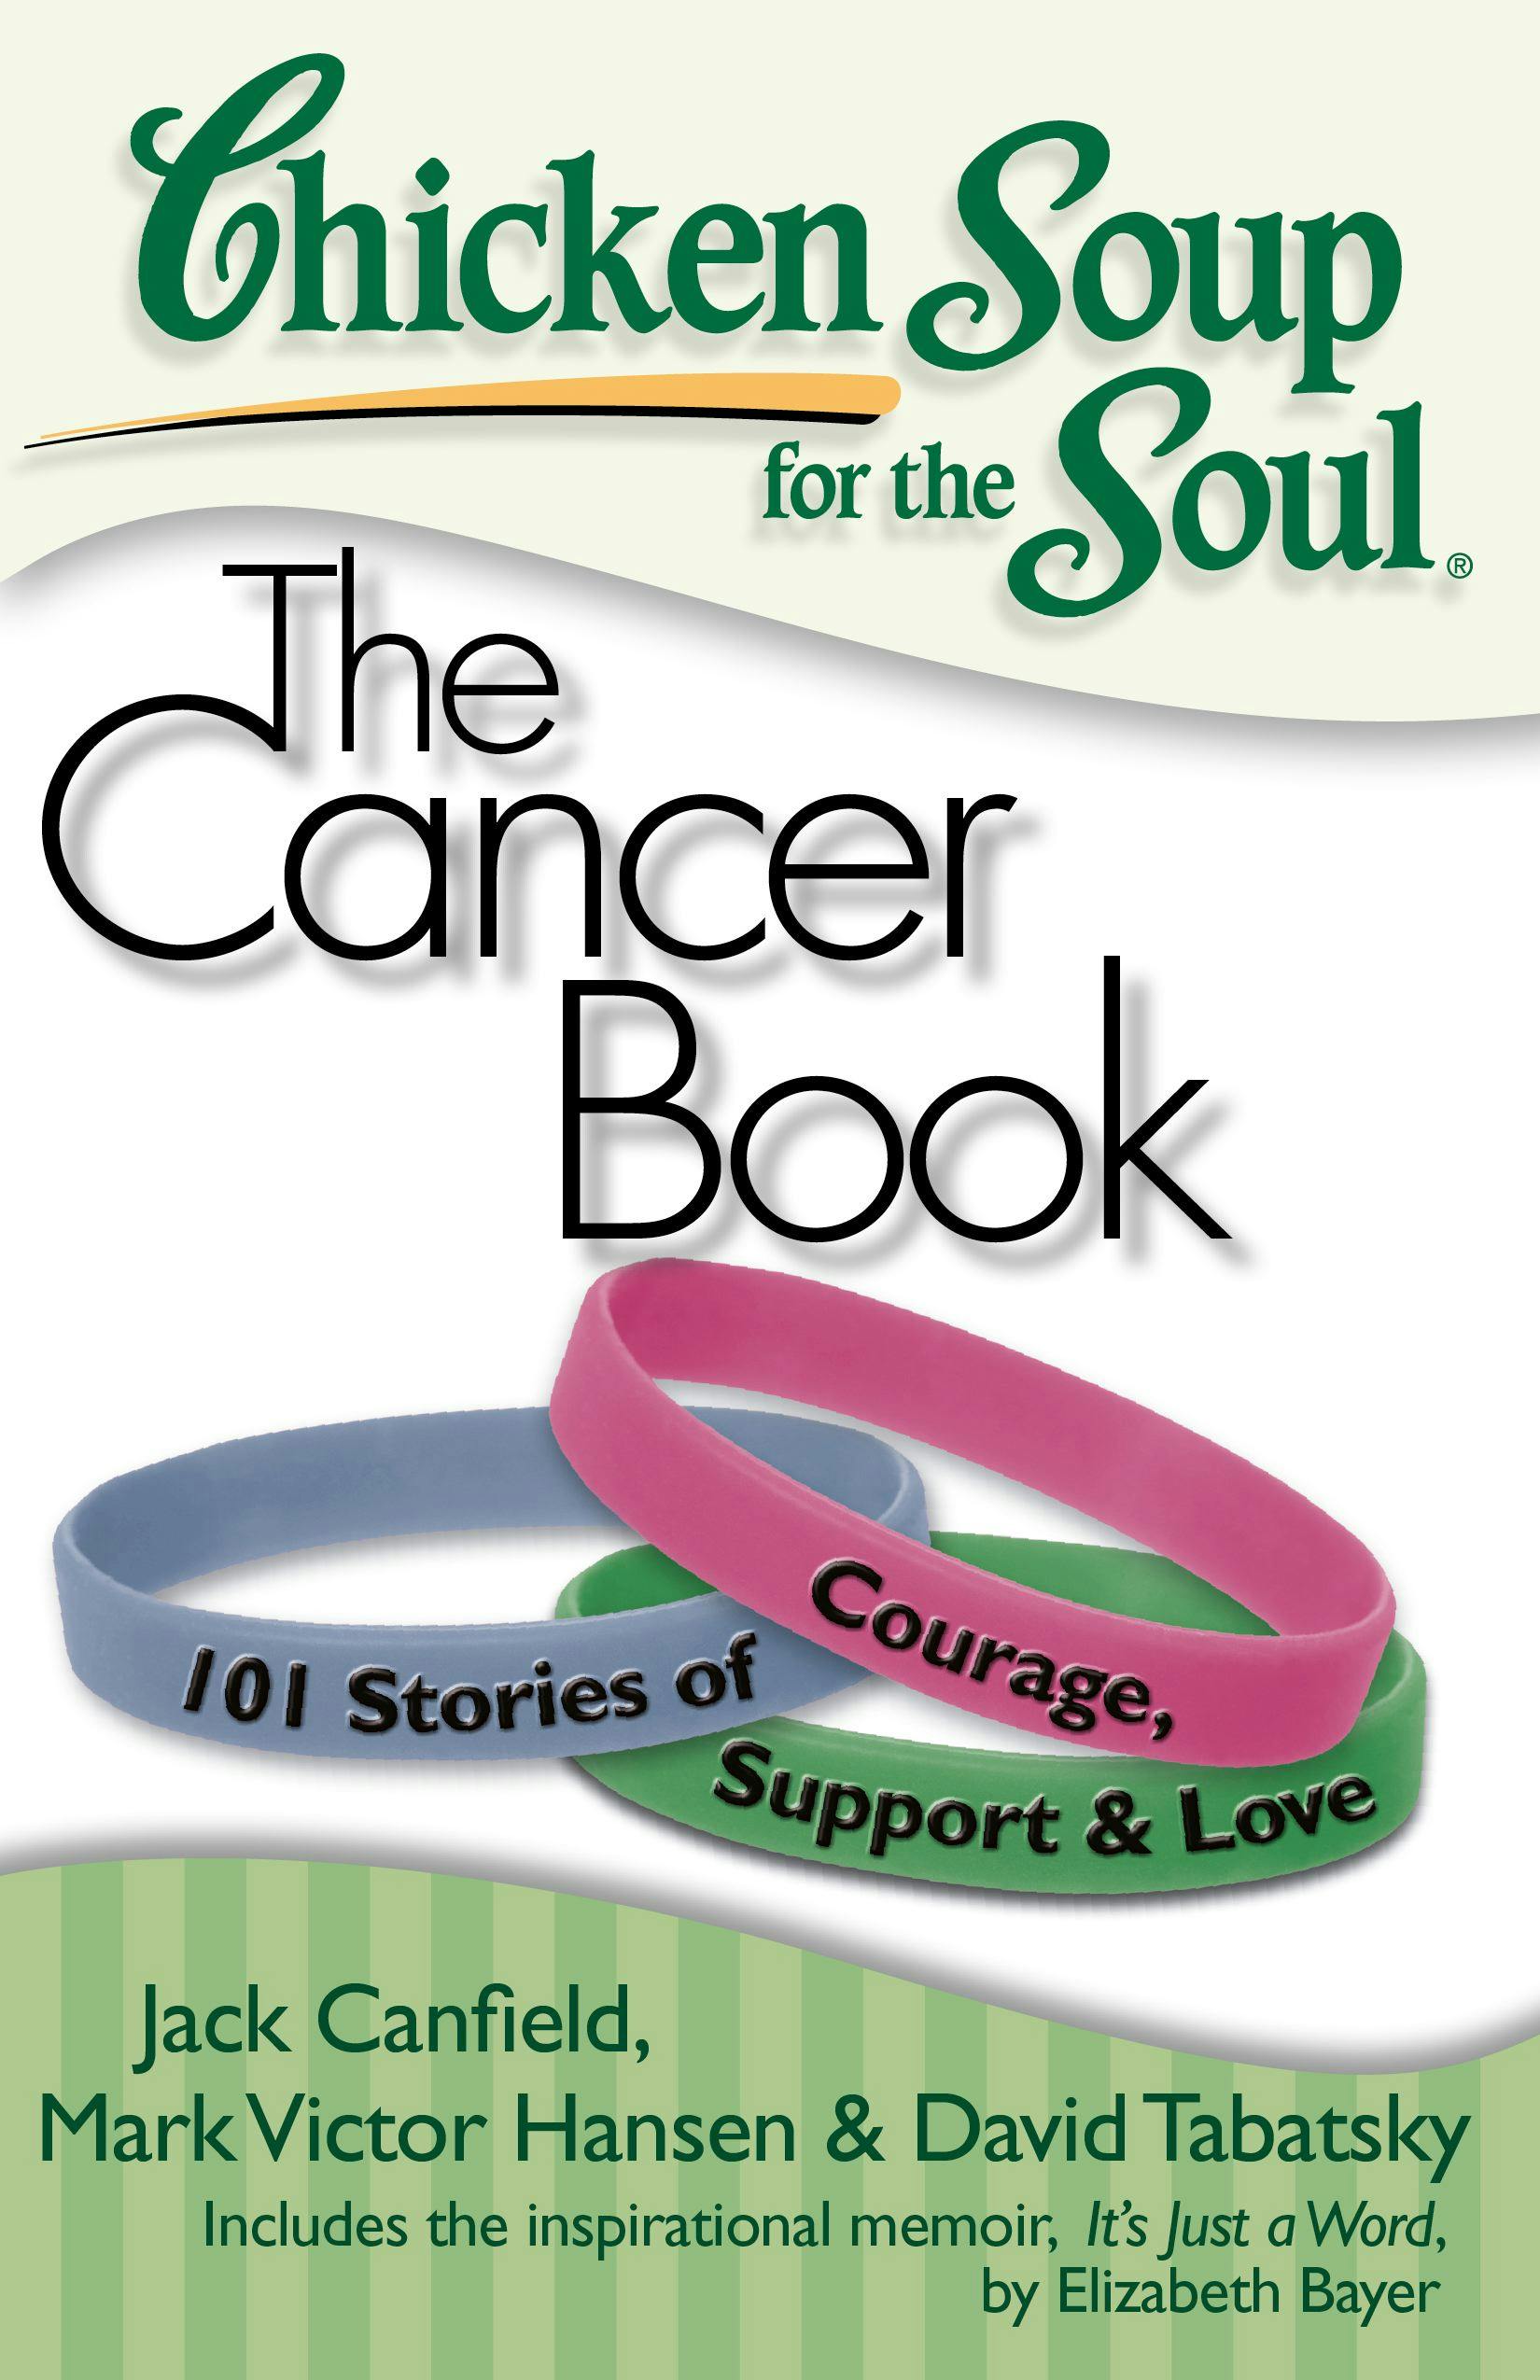 Chicken Soup for the Soul: The Cancer Book: 101 Stories of Courage, Support and Love - Mark Victor Hansen, David Tabatsky, Jack Canfield